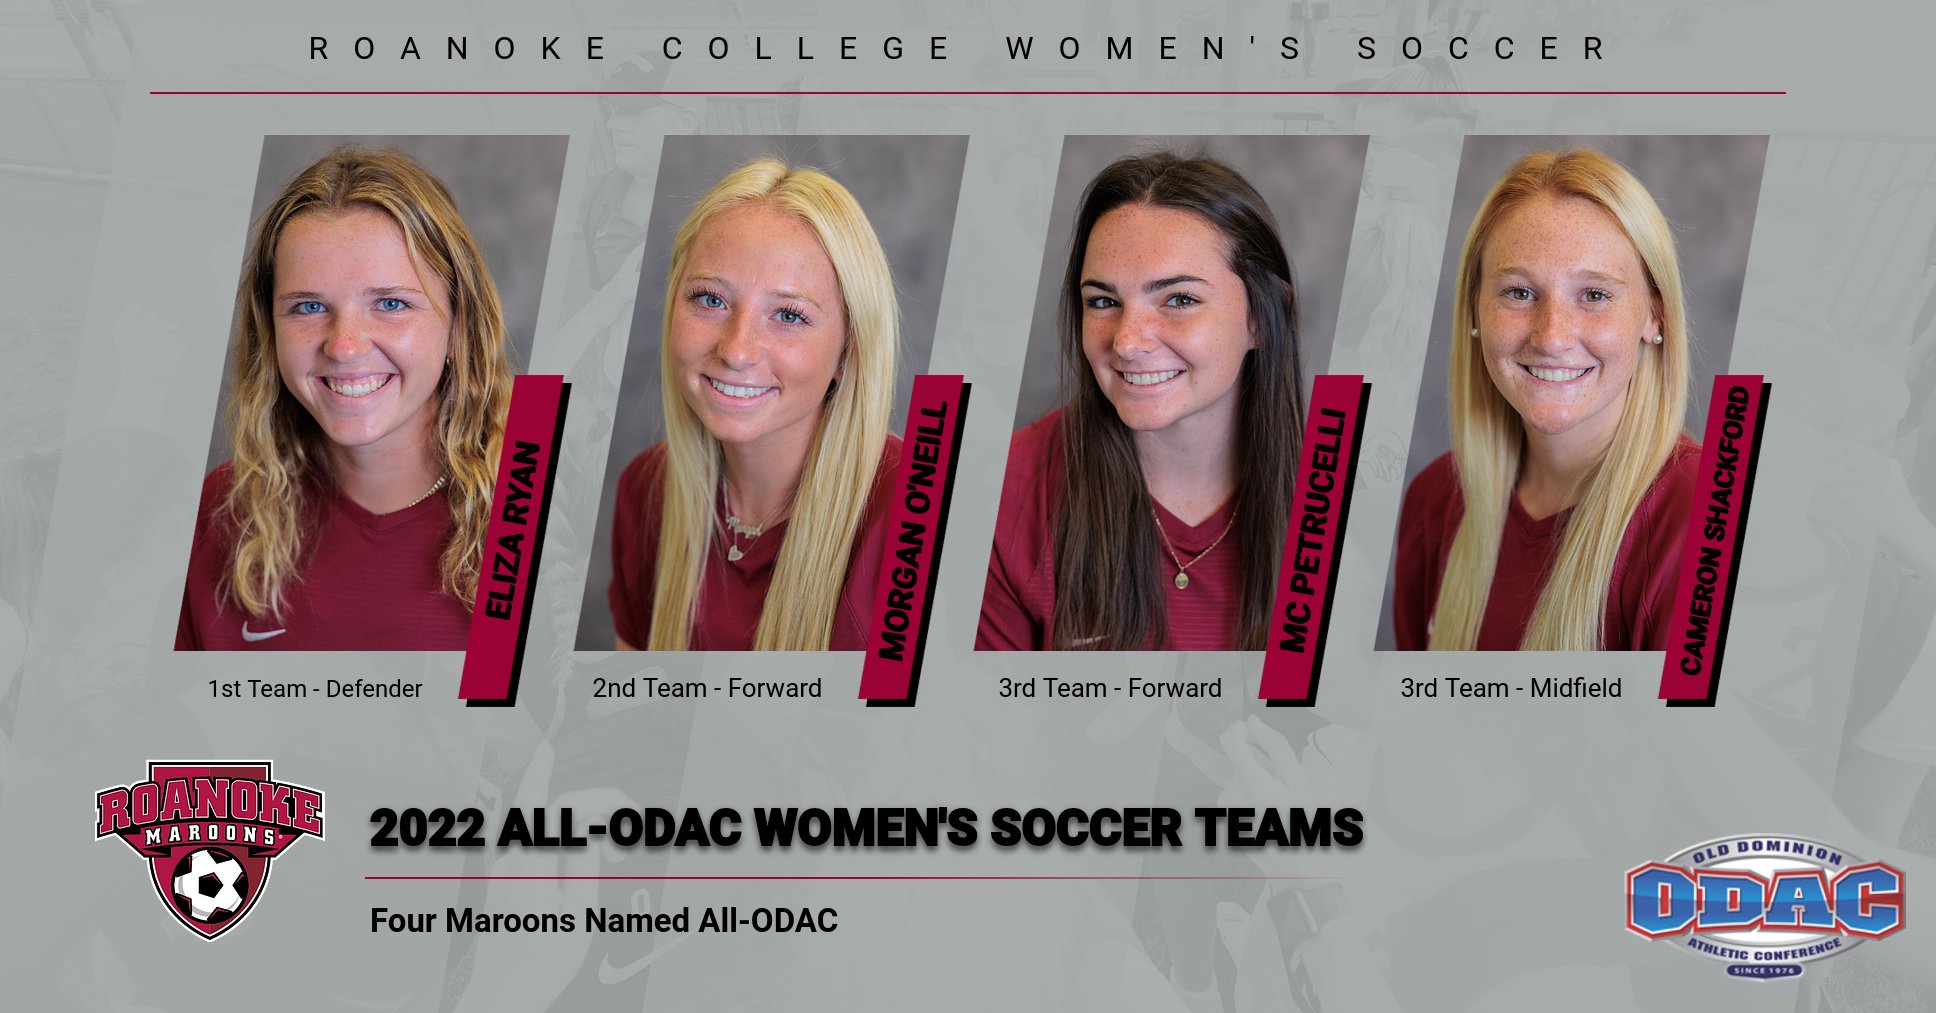 Ryan Named First Team, Leads Four Maroons on All-ODAC Teams